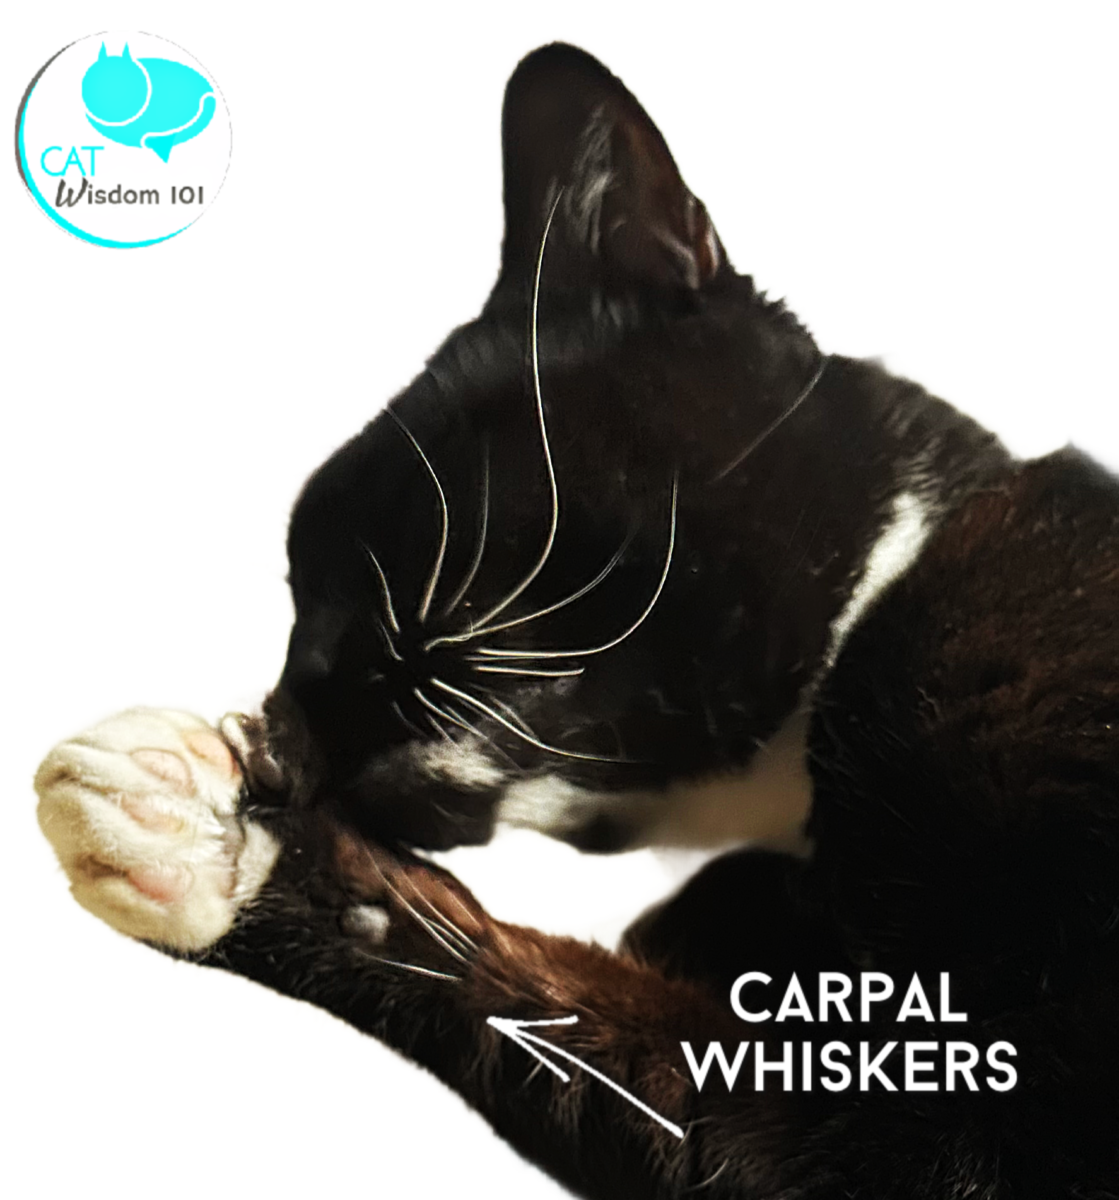 Leg carpal whiskers on cat